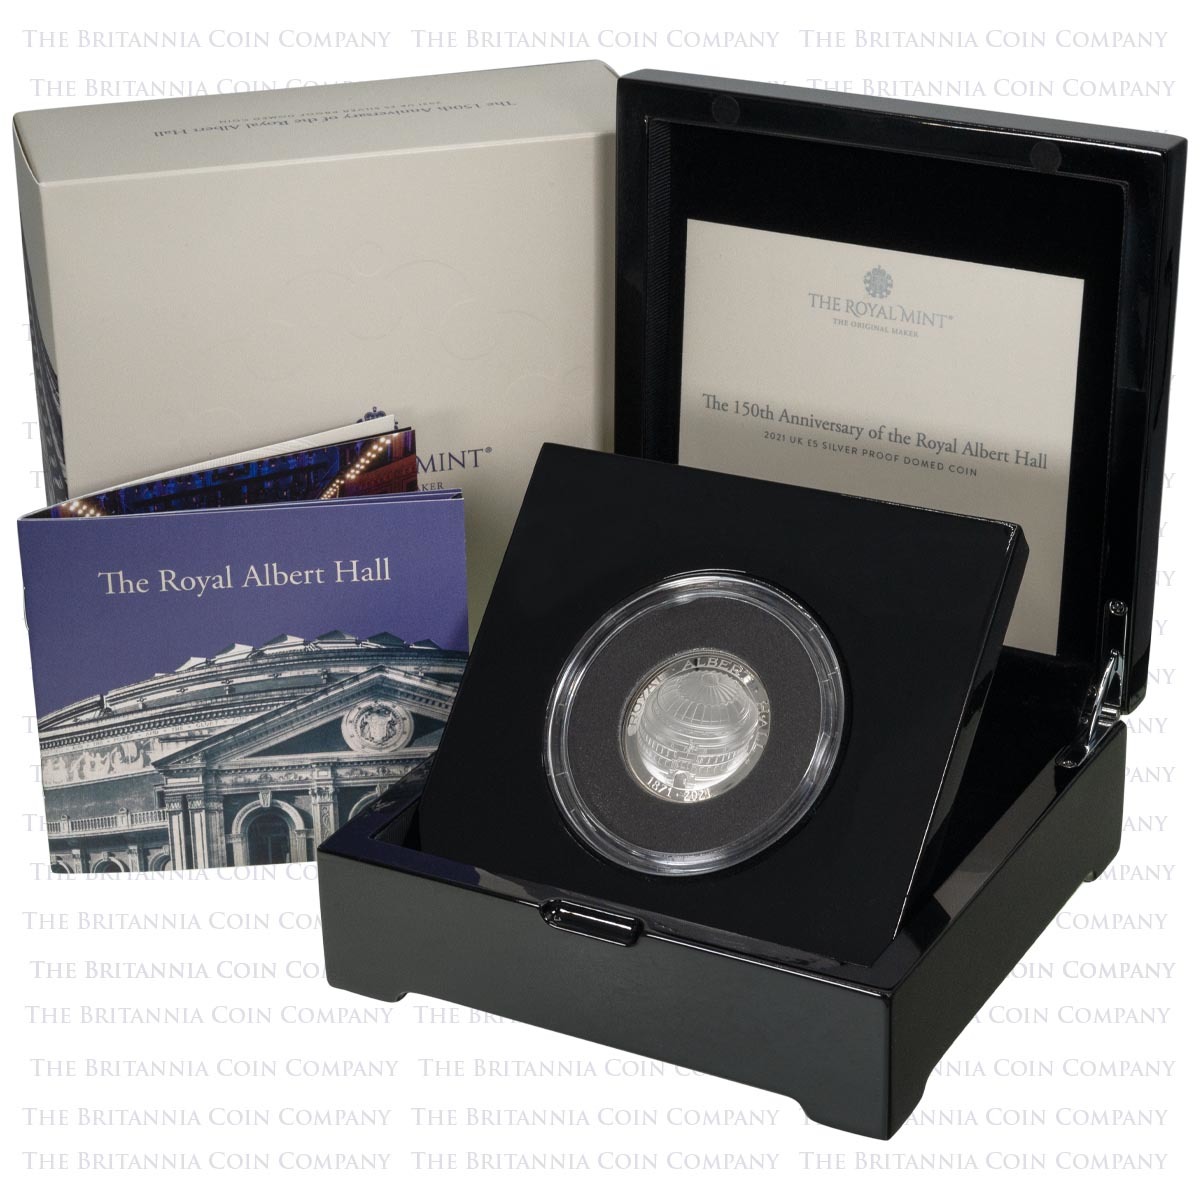 UK21AHSD 2021 Royal Albert Hall Domed Five Pound Crown Silver Proof Coin Boxed